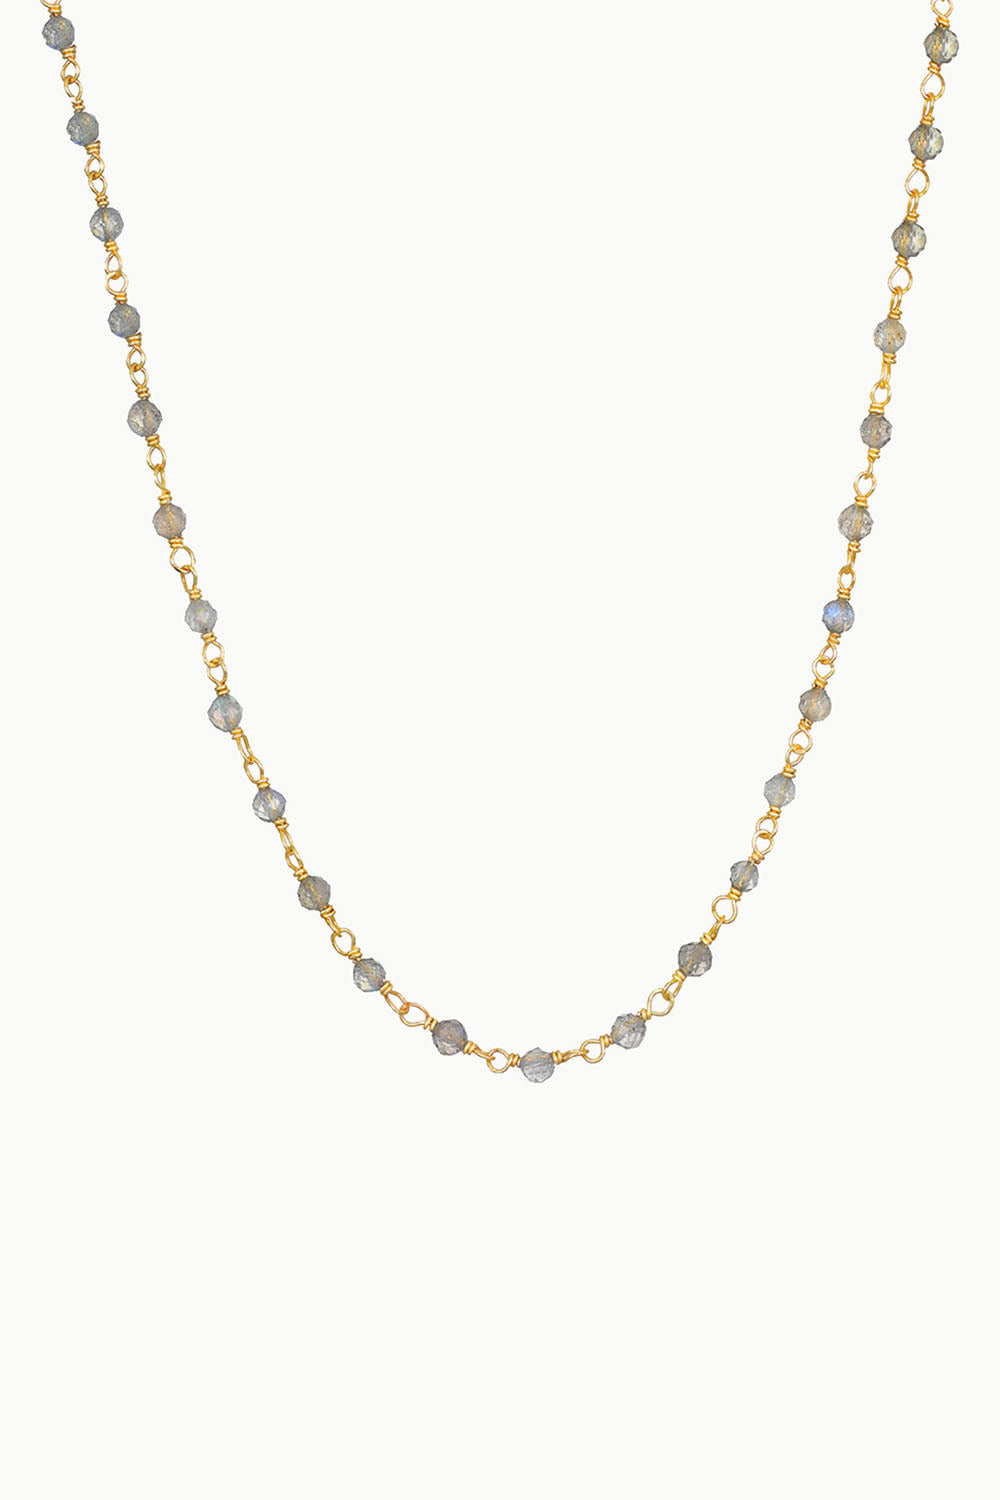 Sivalya Pyrite Beaded Link Chain Necklace